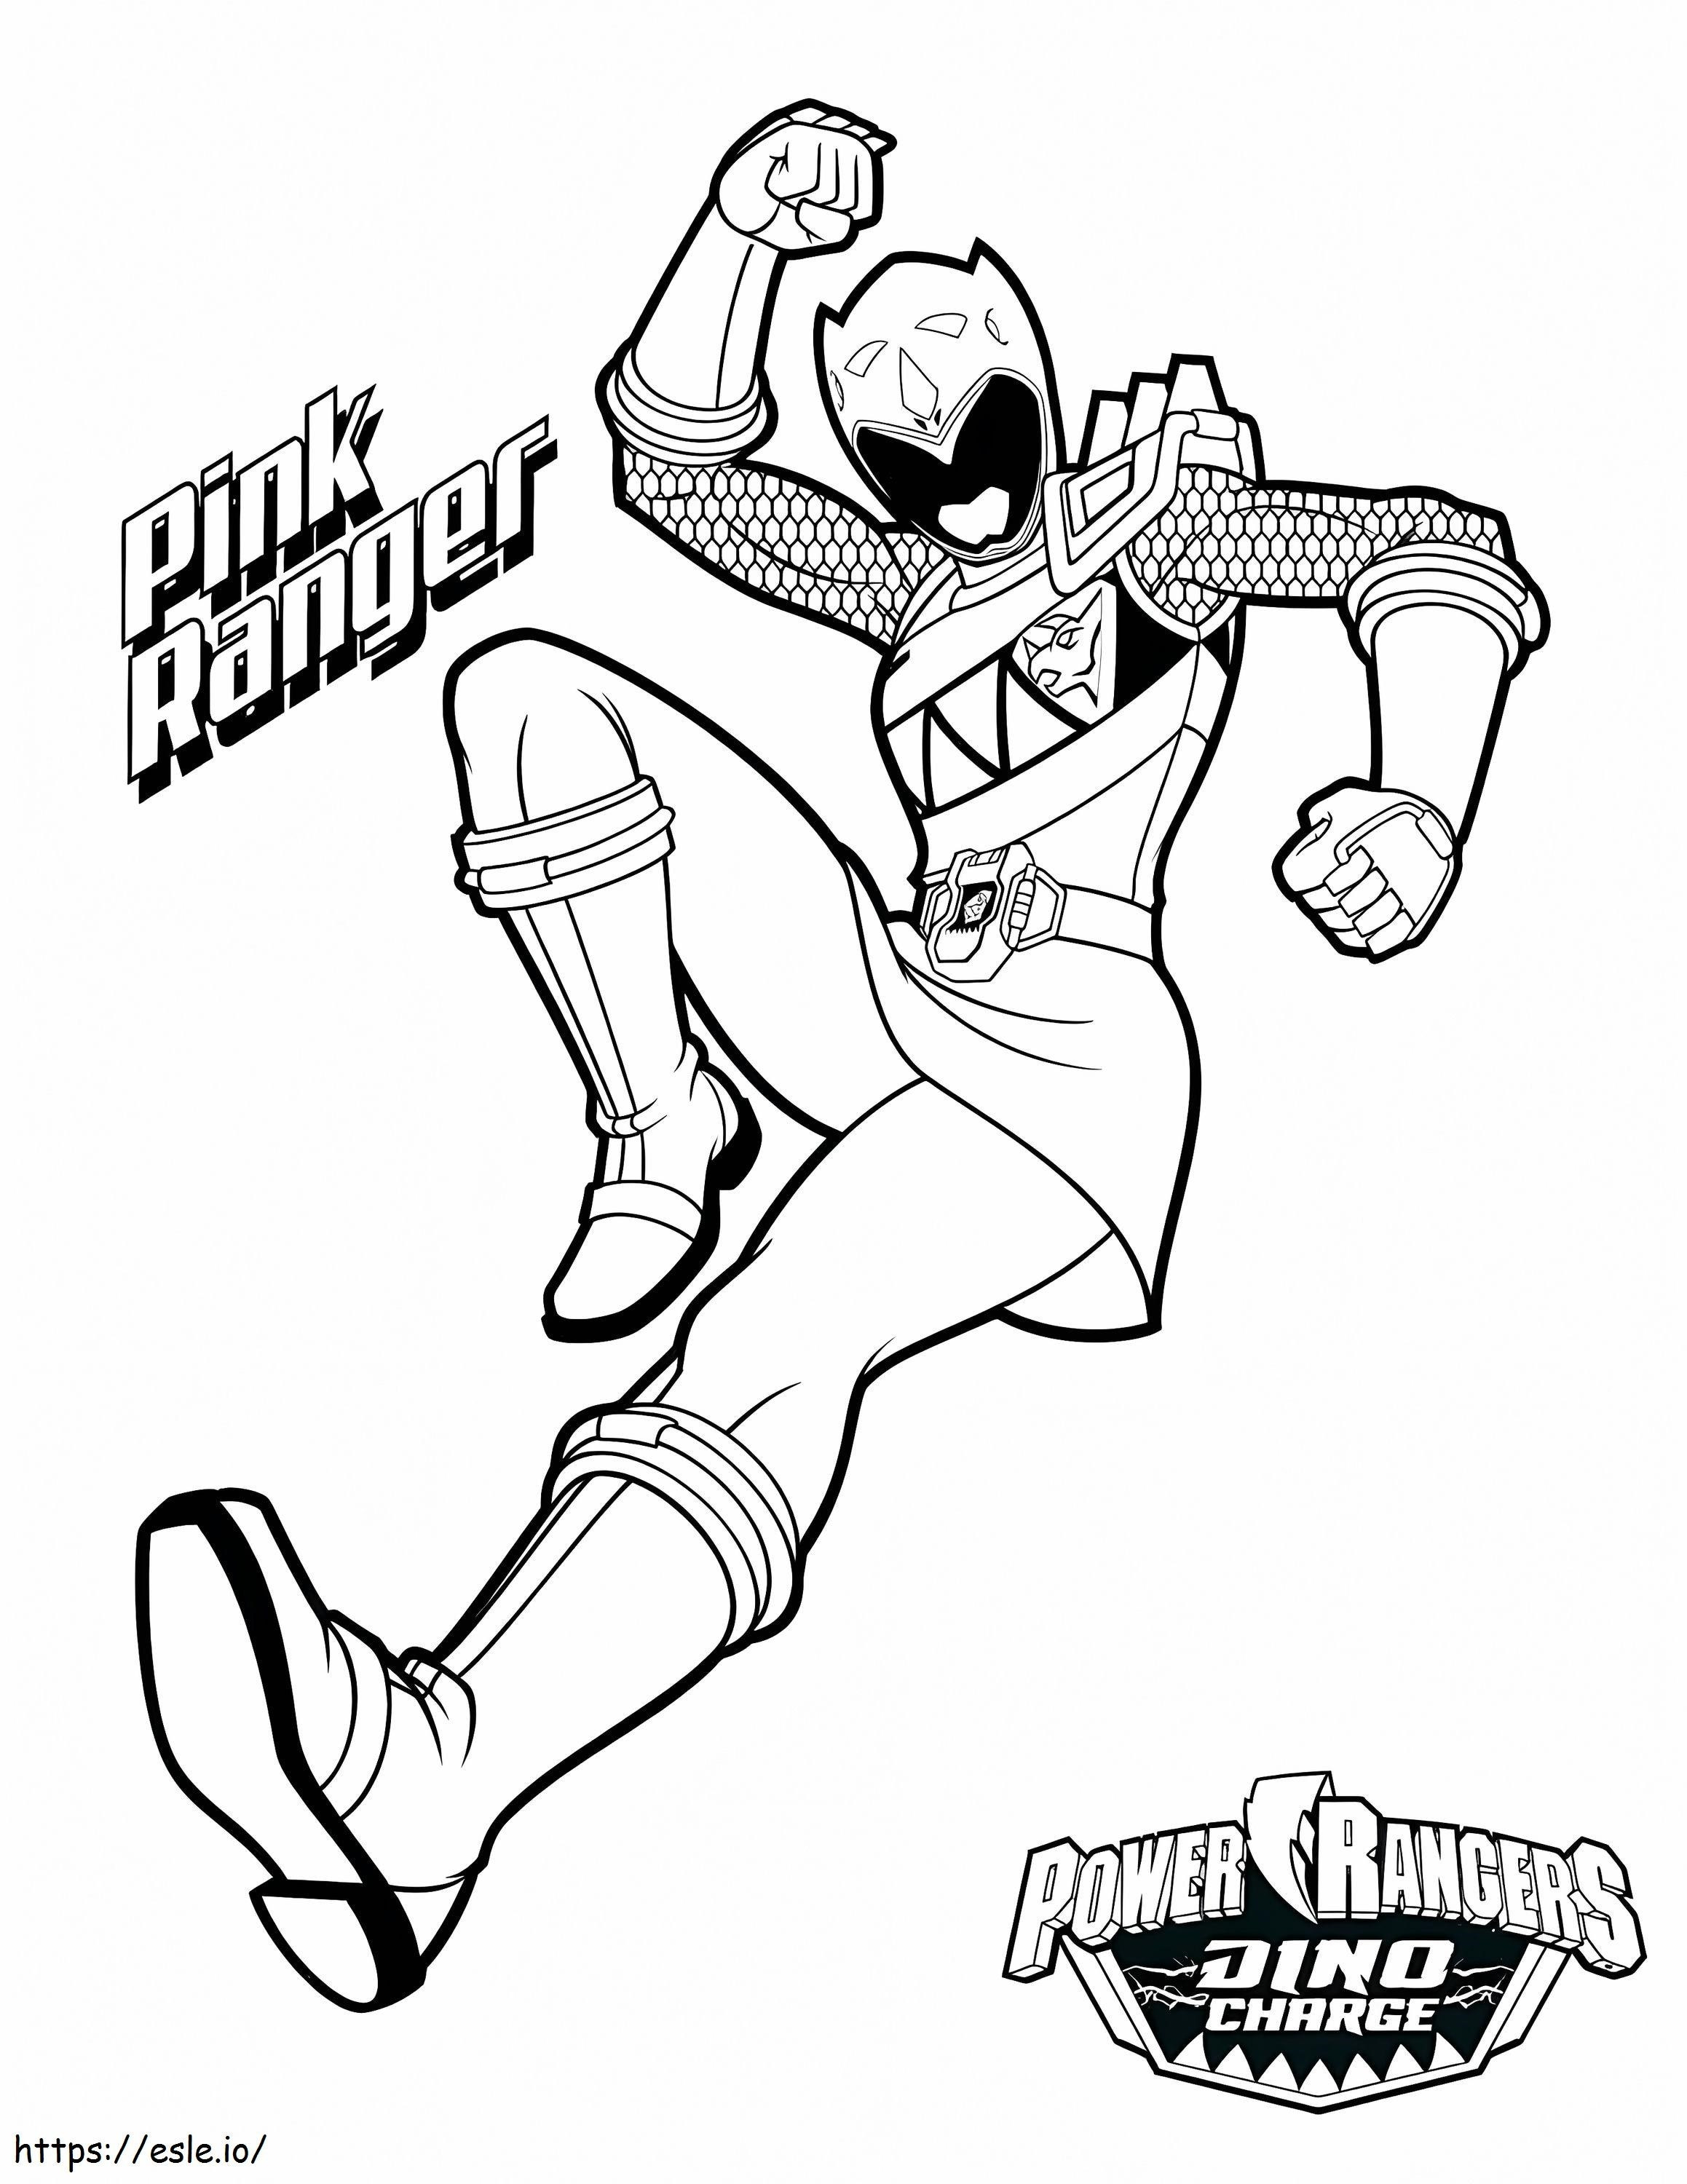 Power Rangers 5 coloring page